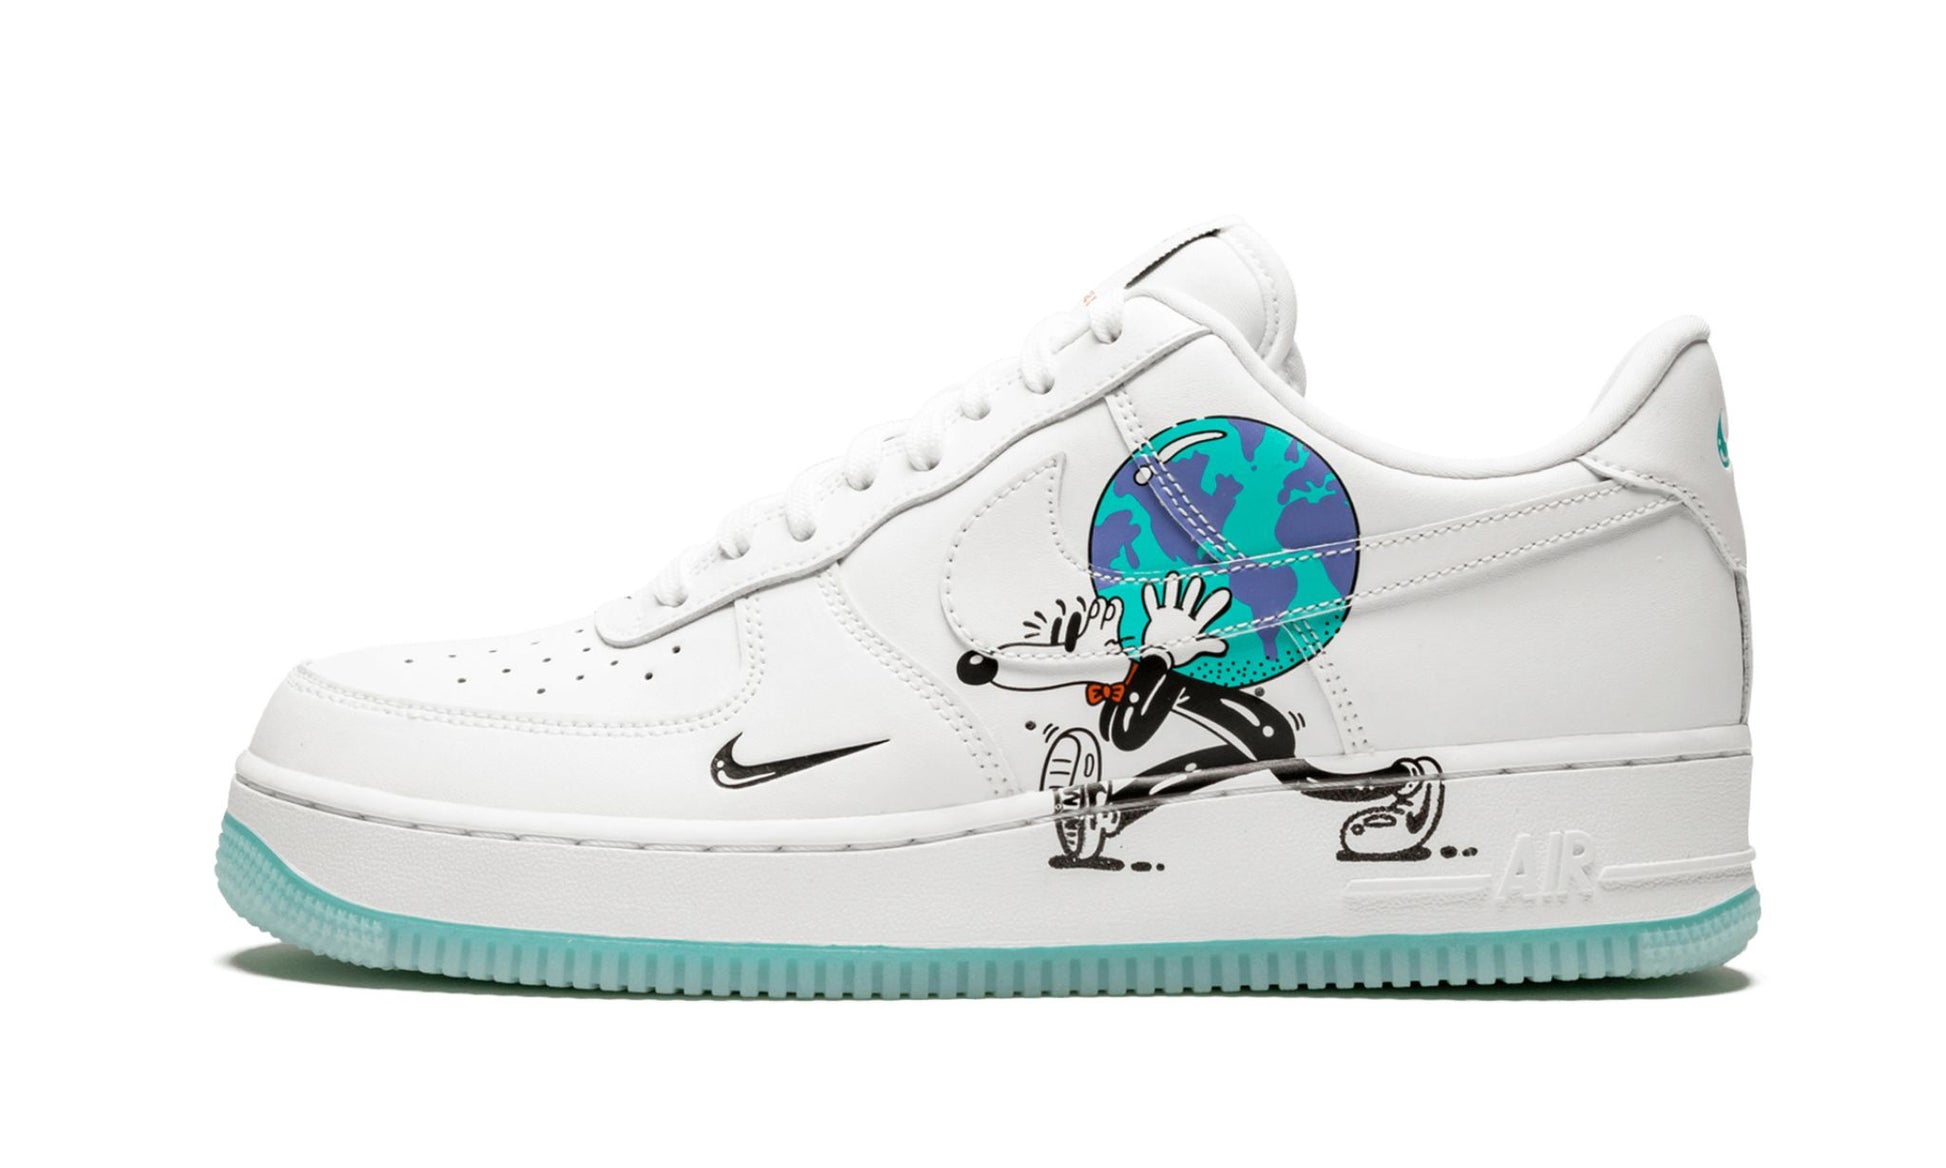 Air Force 1 Flyleather QS "Earth Day"